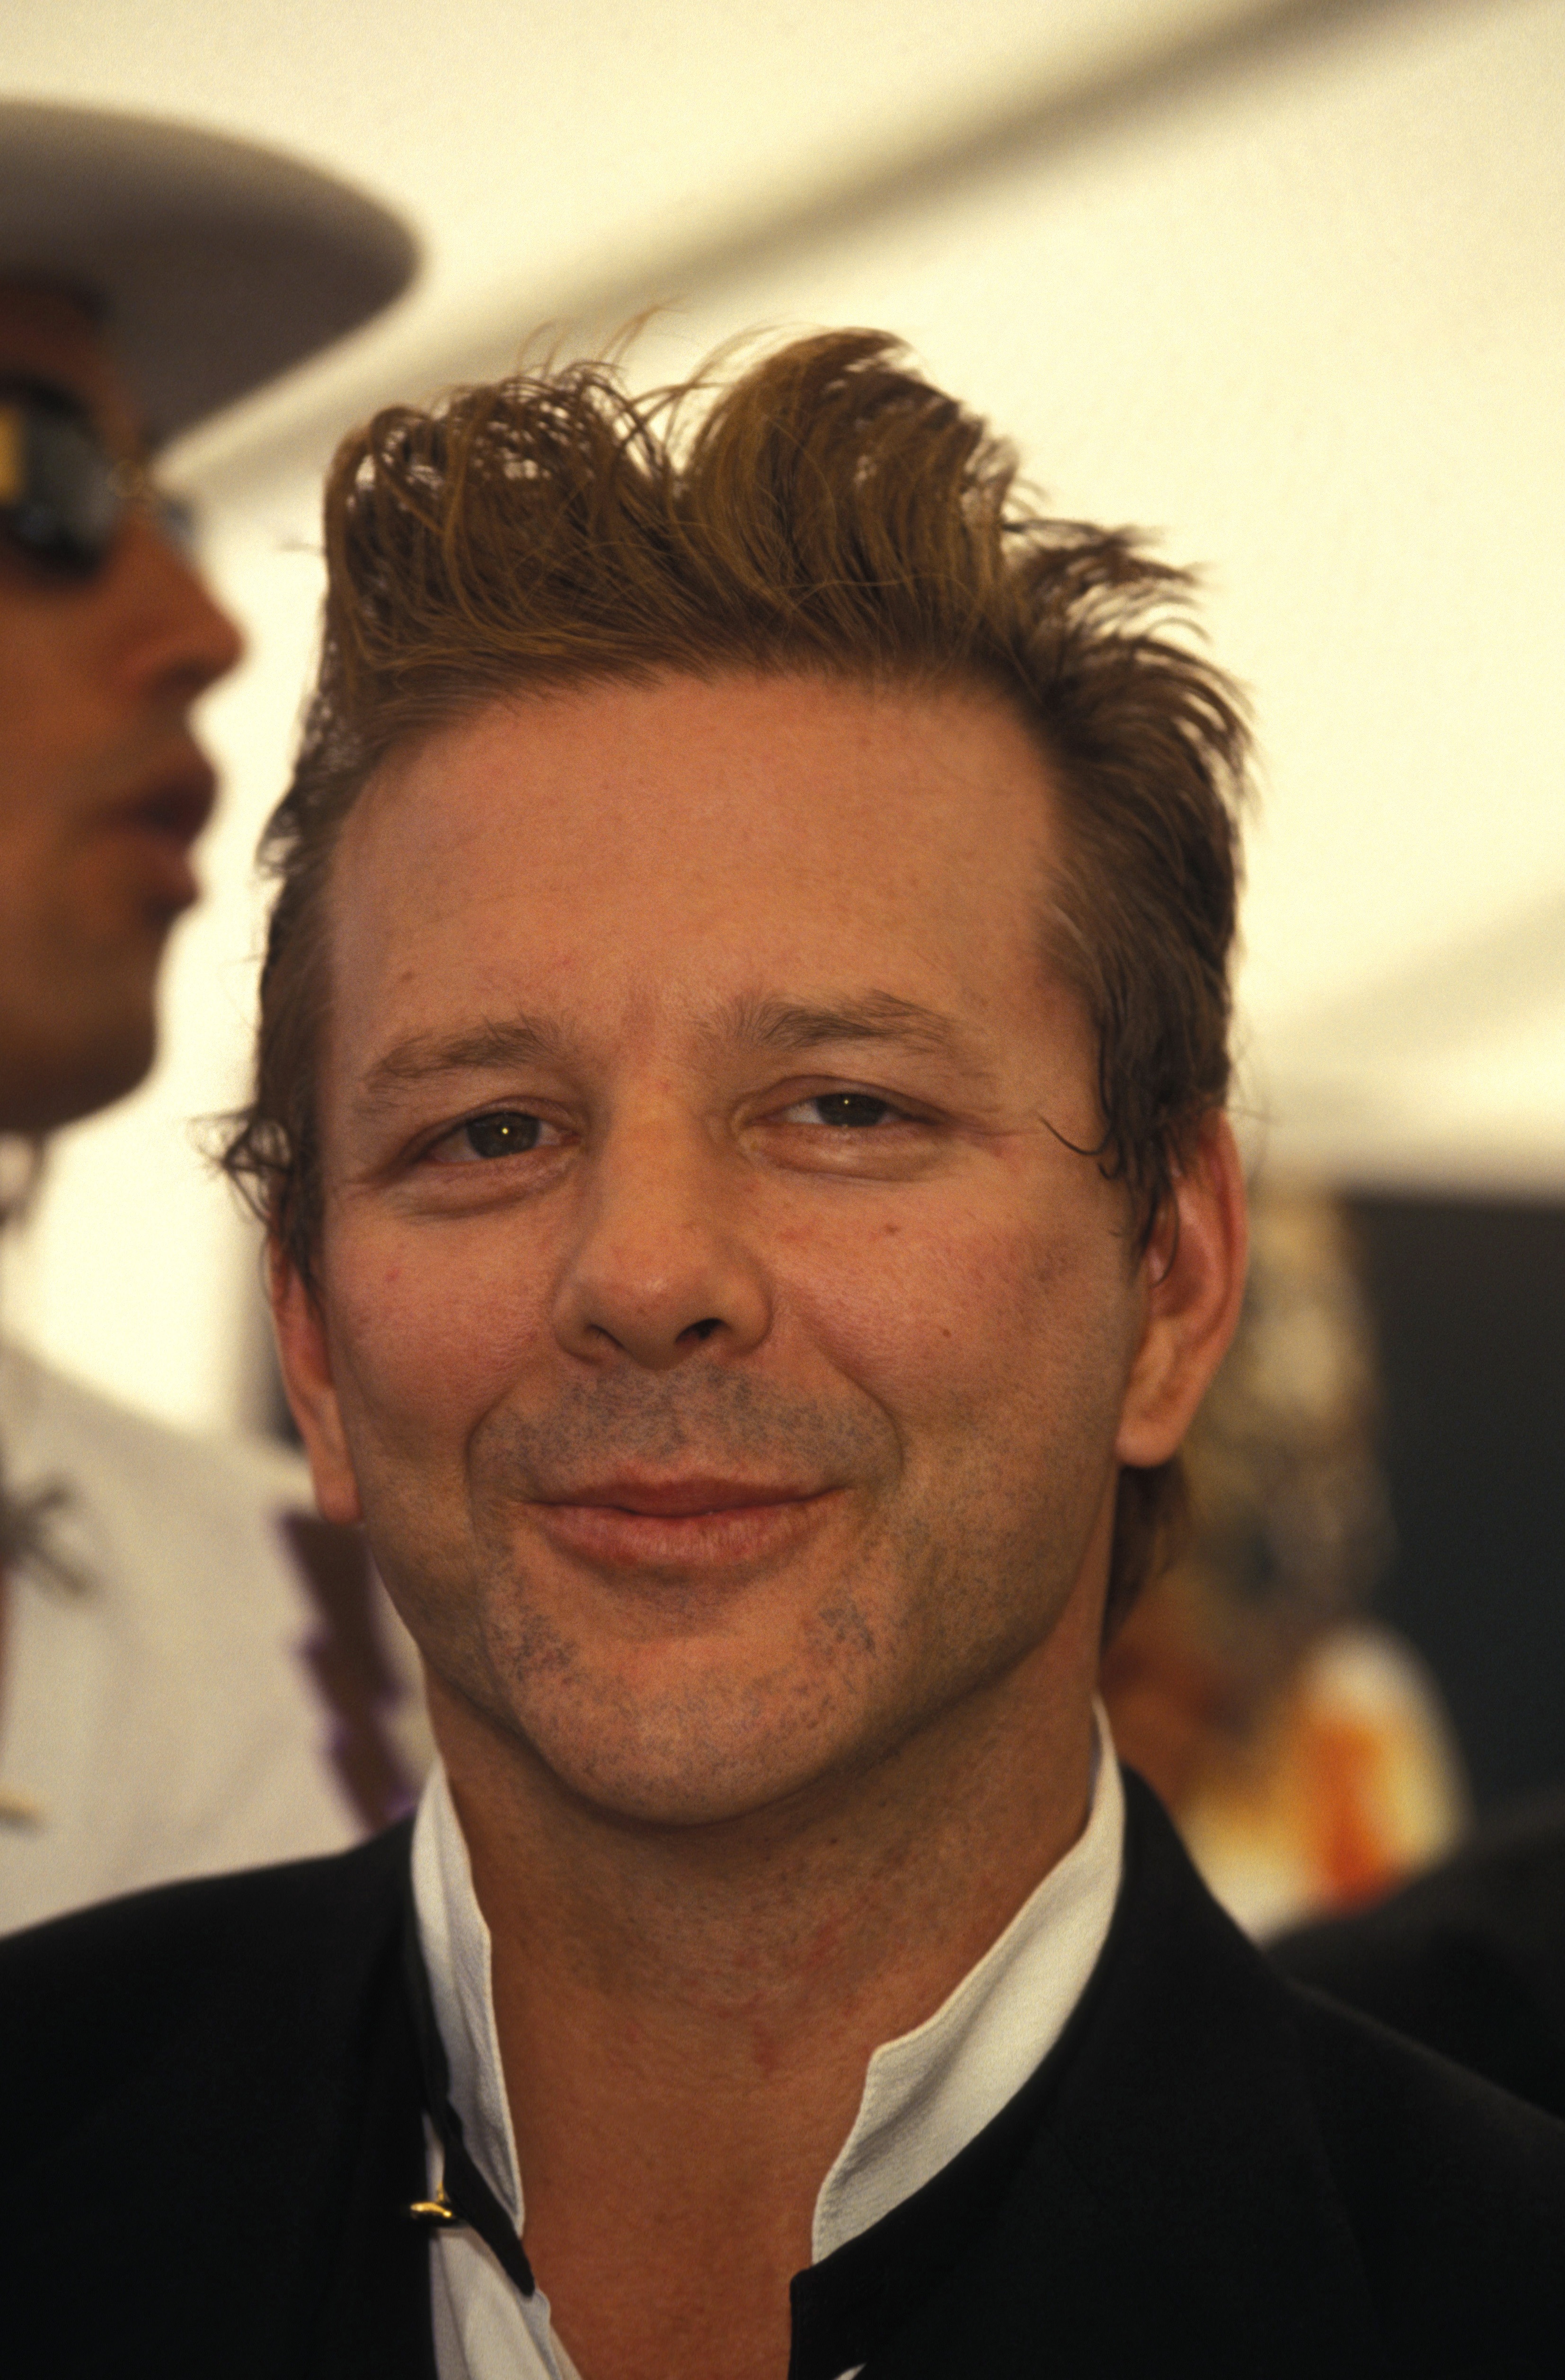 Mickey Rourke at the Film Festival on May 16, 1994 in Cannes, France. | Source: Getty Images